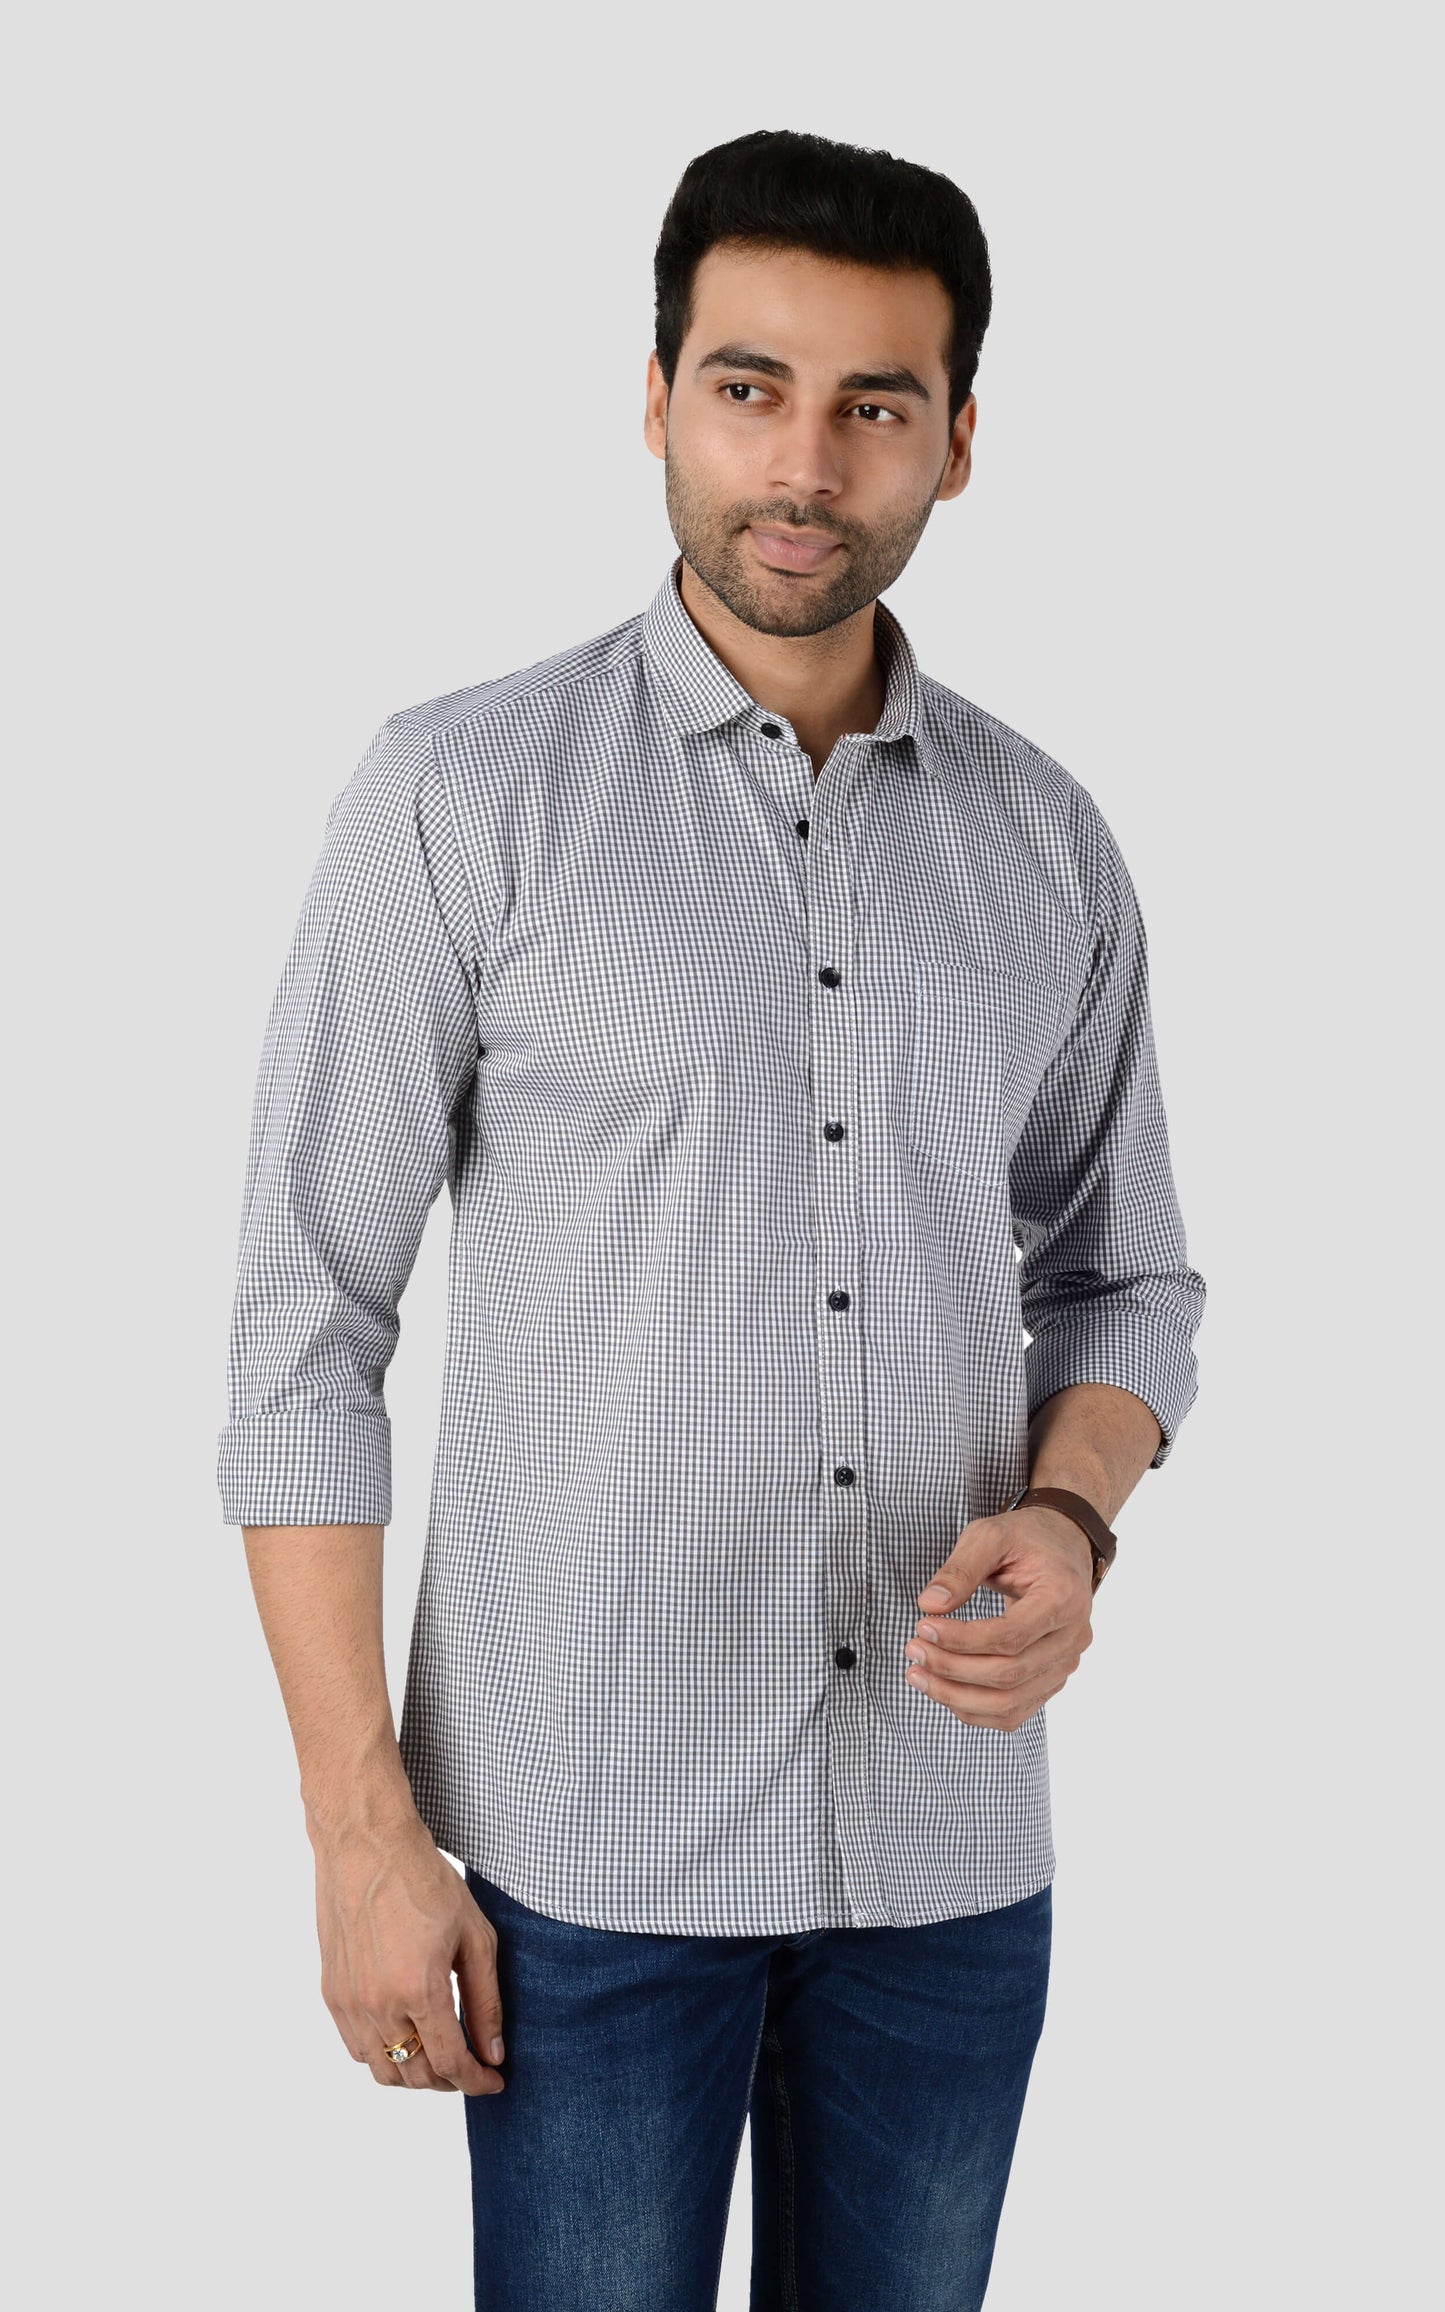 5thanfold Men's Casual Pure Cotton Full Sleeve Checkered Black Slim Fit Shirt